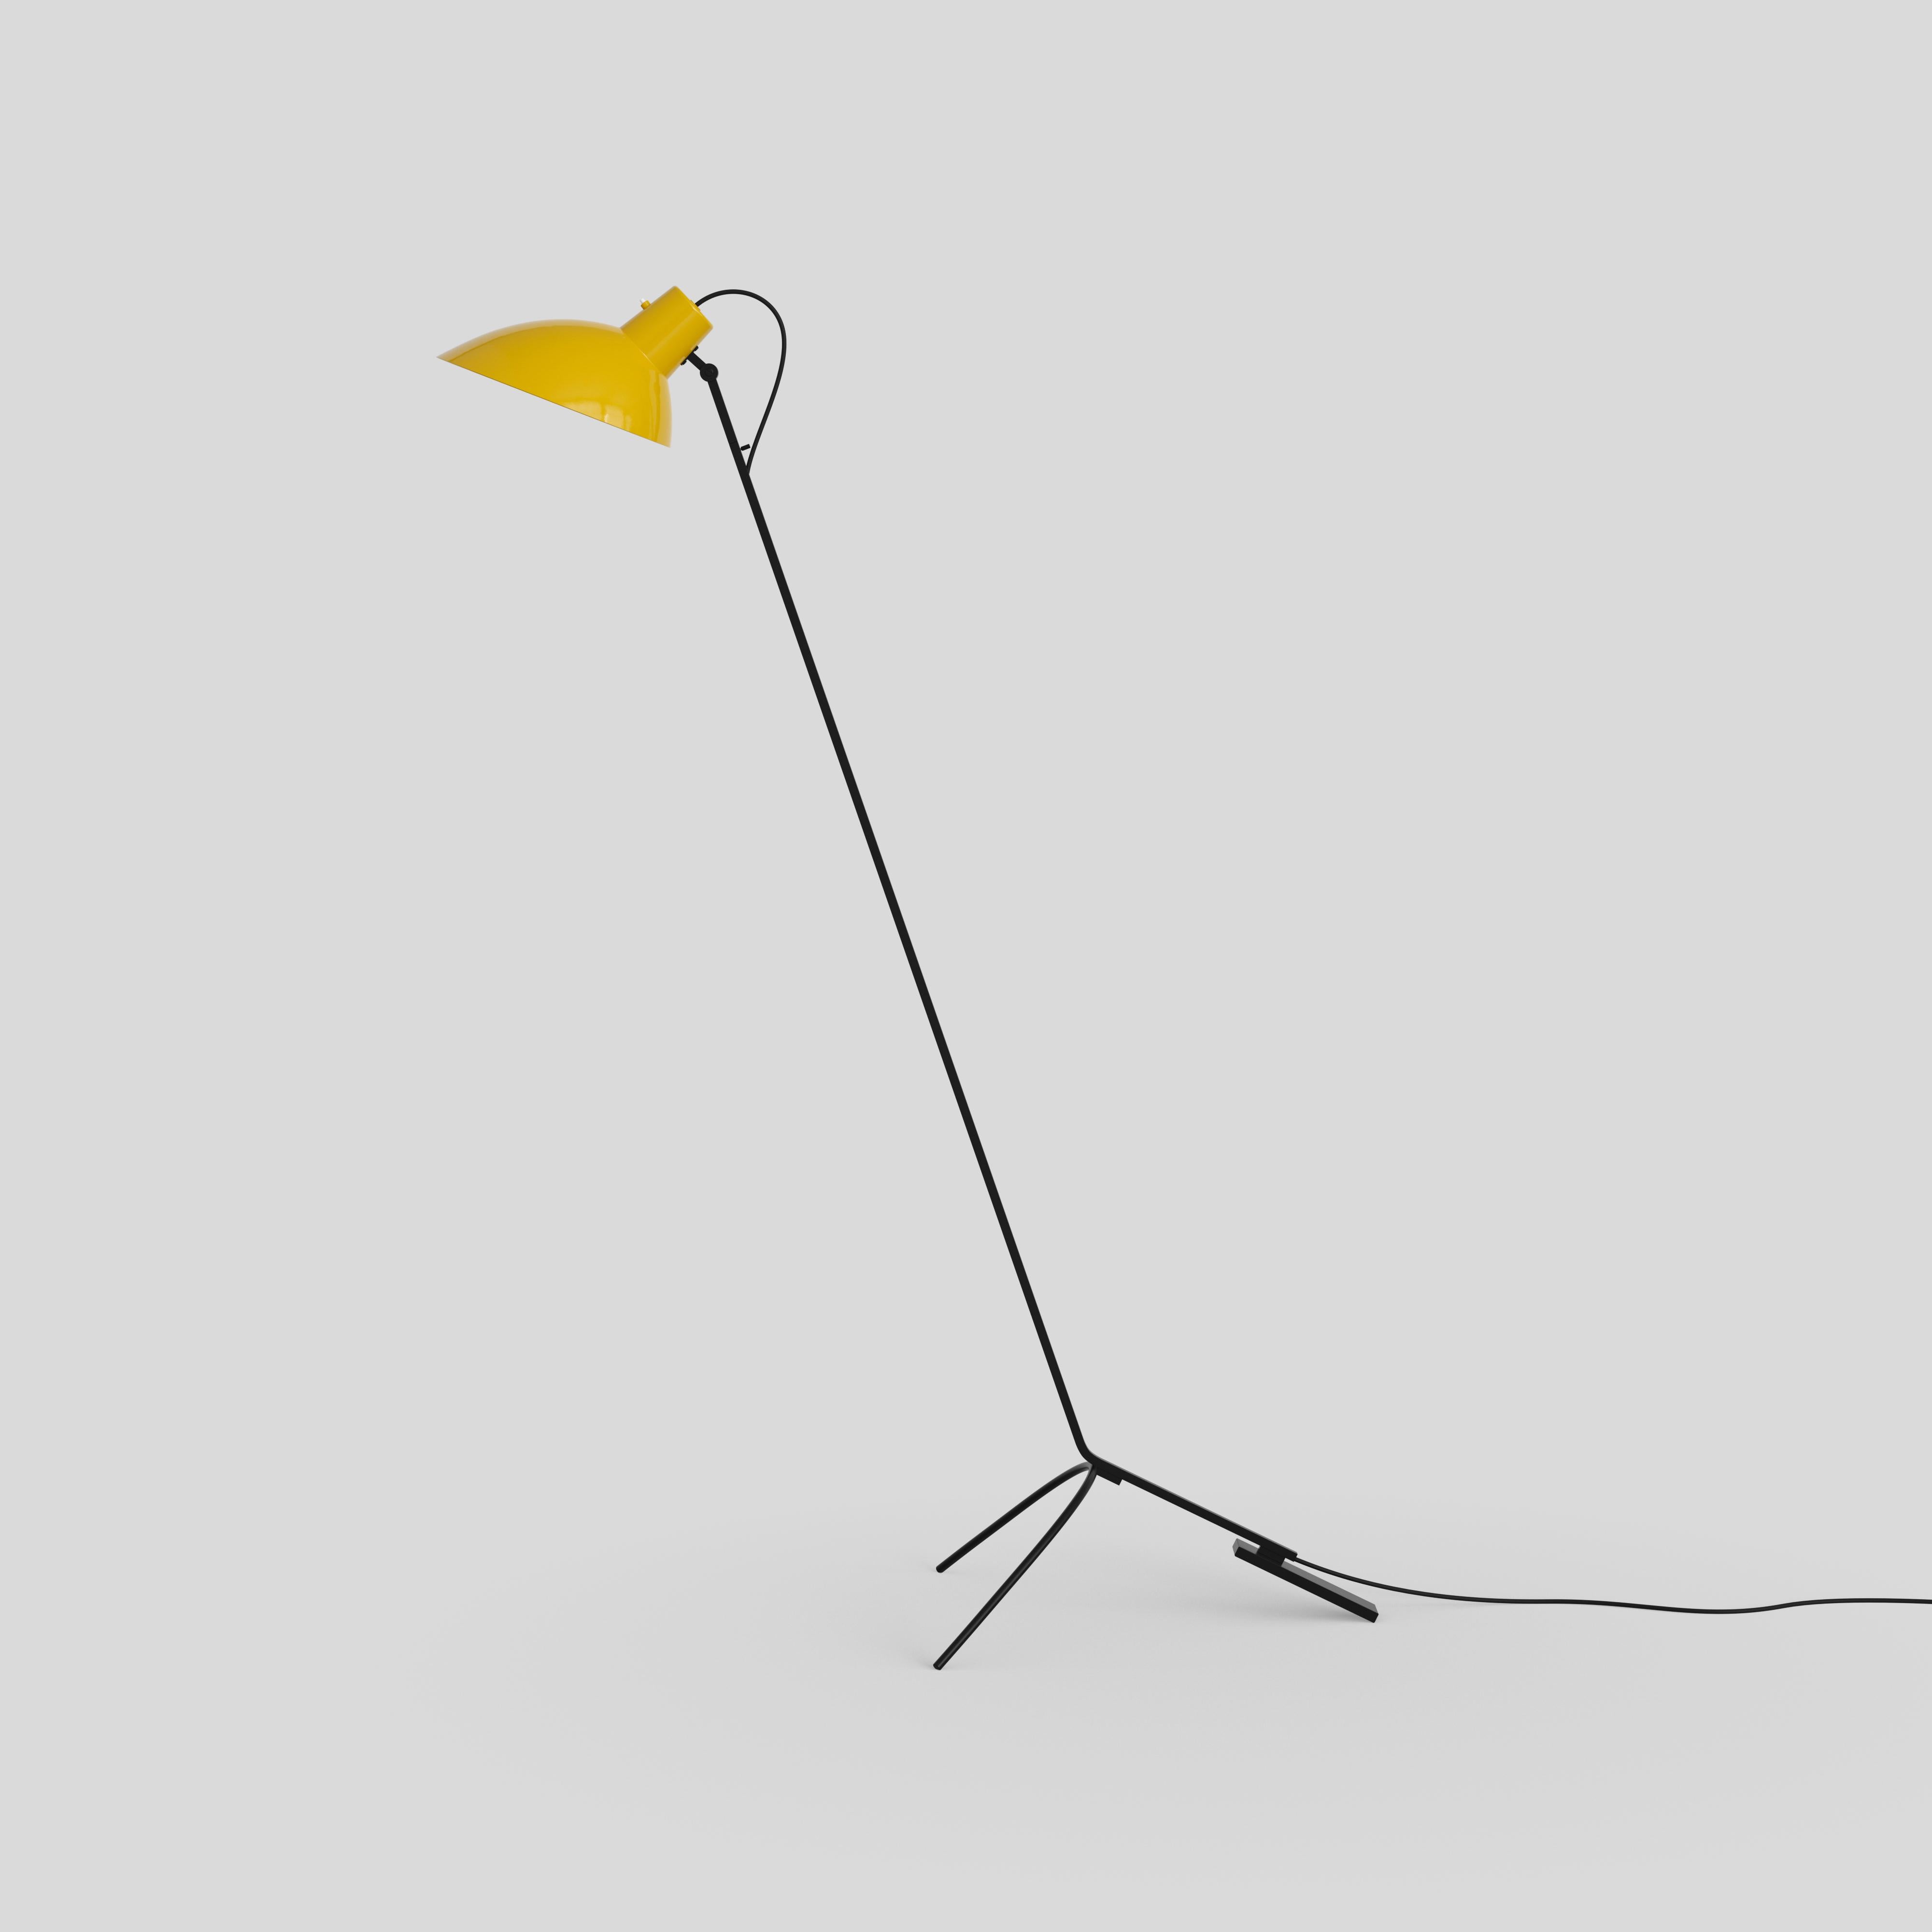 VV Cinquanta floor lamp
Design by Vittoriano Viganò
This version is with yellow lacquered reflector and black frame.

The VV Cinquanta features an elegant and versatile posable direct light source that can swivel and tilt, from direct working